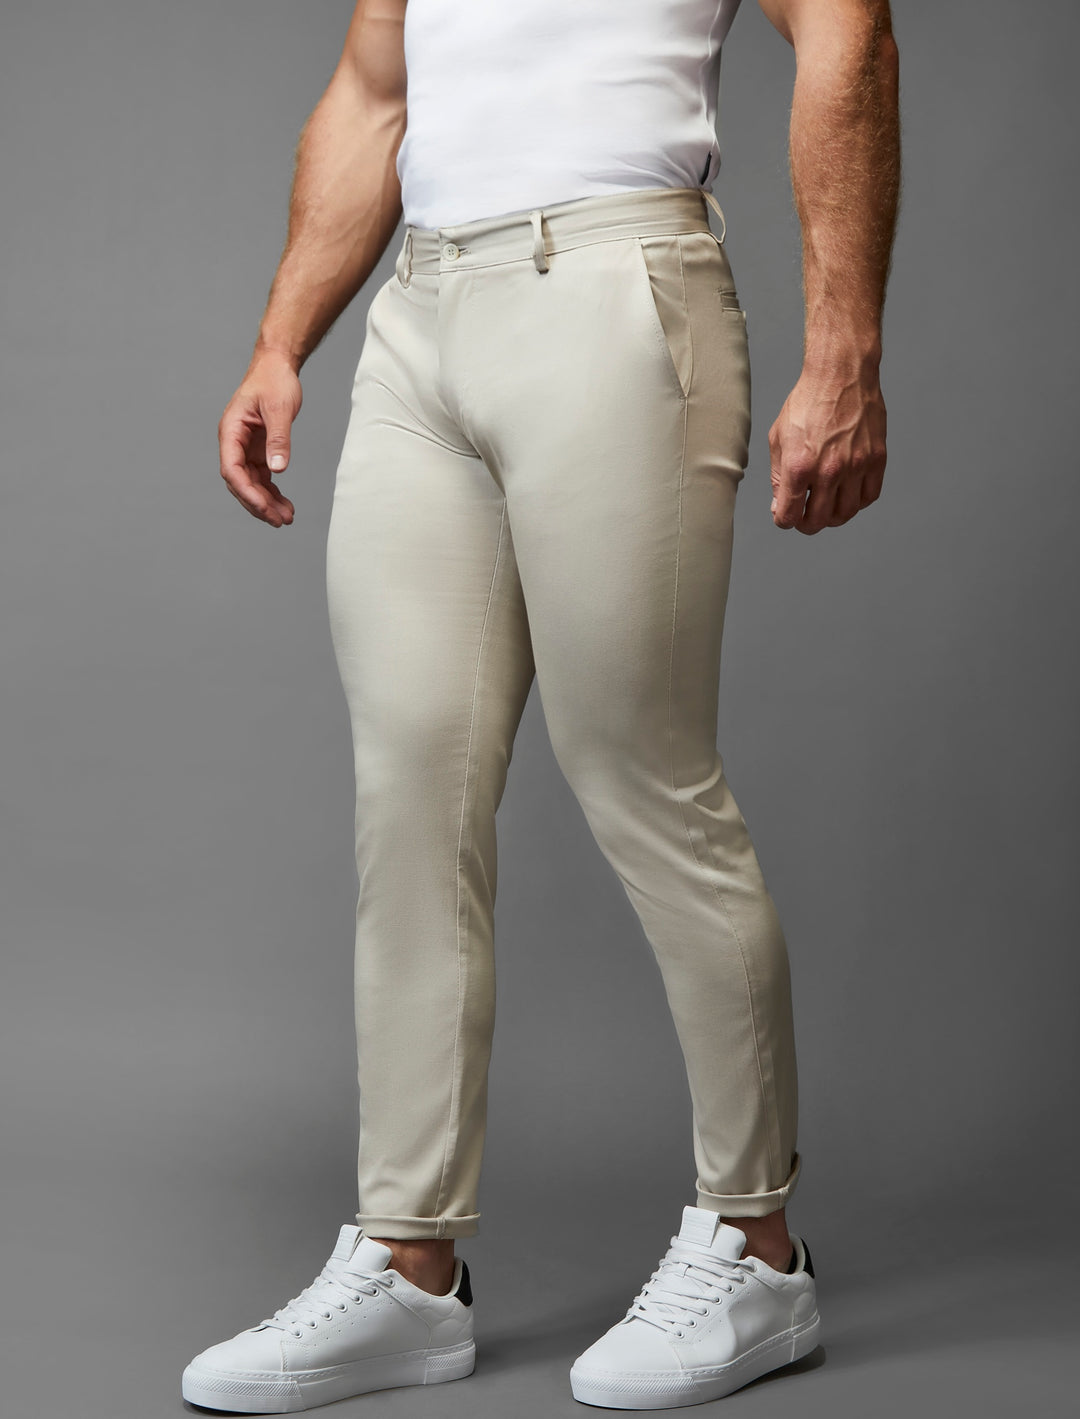 Tapered Menswear's beige chinos in an athletic fit, crafted with stretch for a dynamic wear.